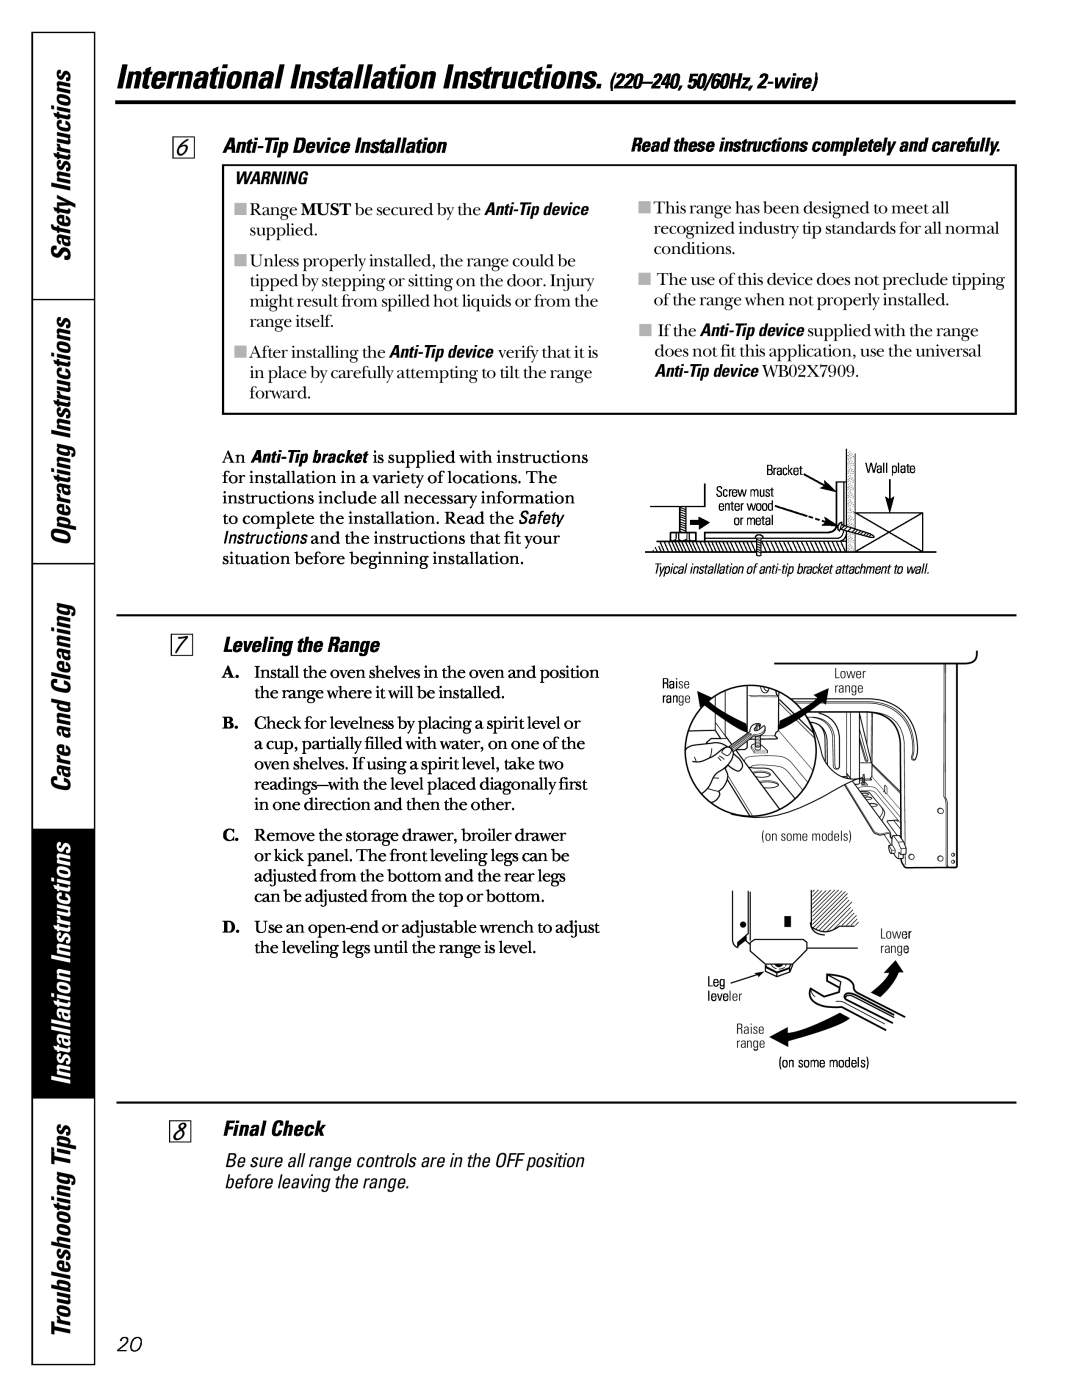 GE JBS08PIC Operating Instructions Safety Instructions, Installation Instructions Care and Cleaning, Leveling the Range 